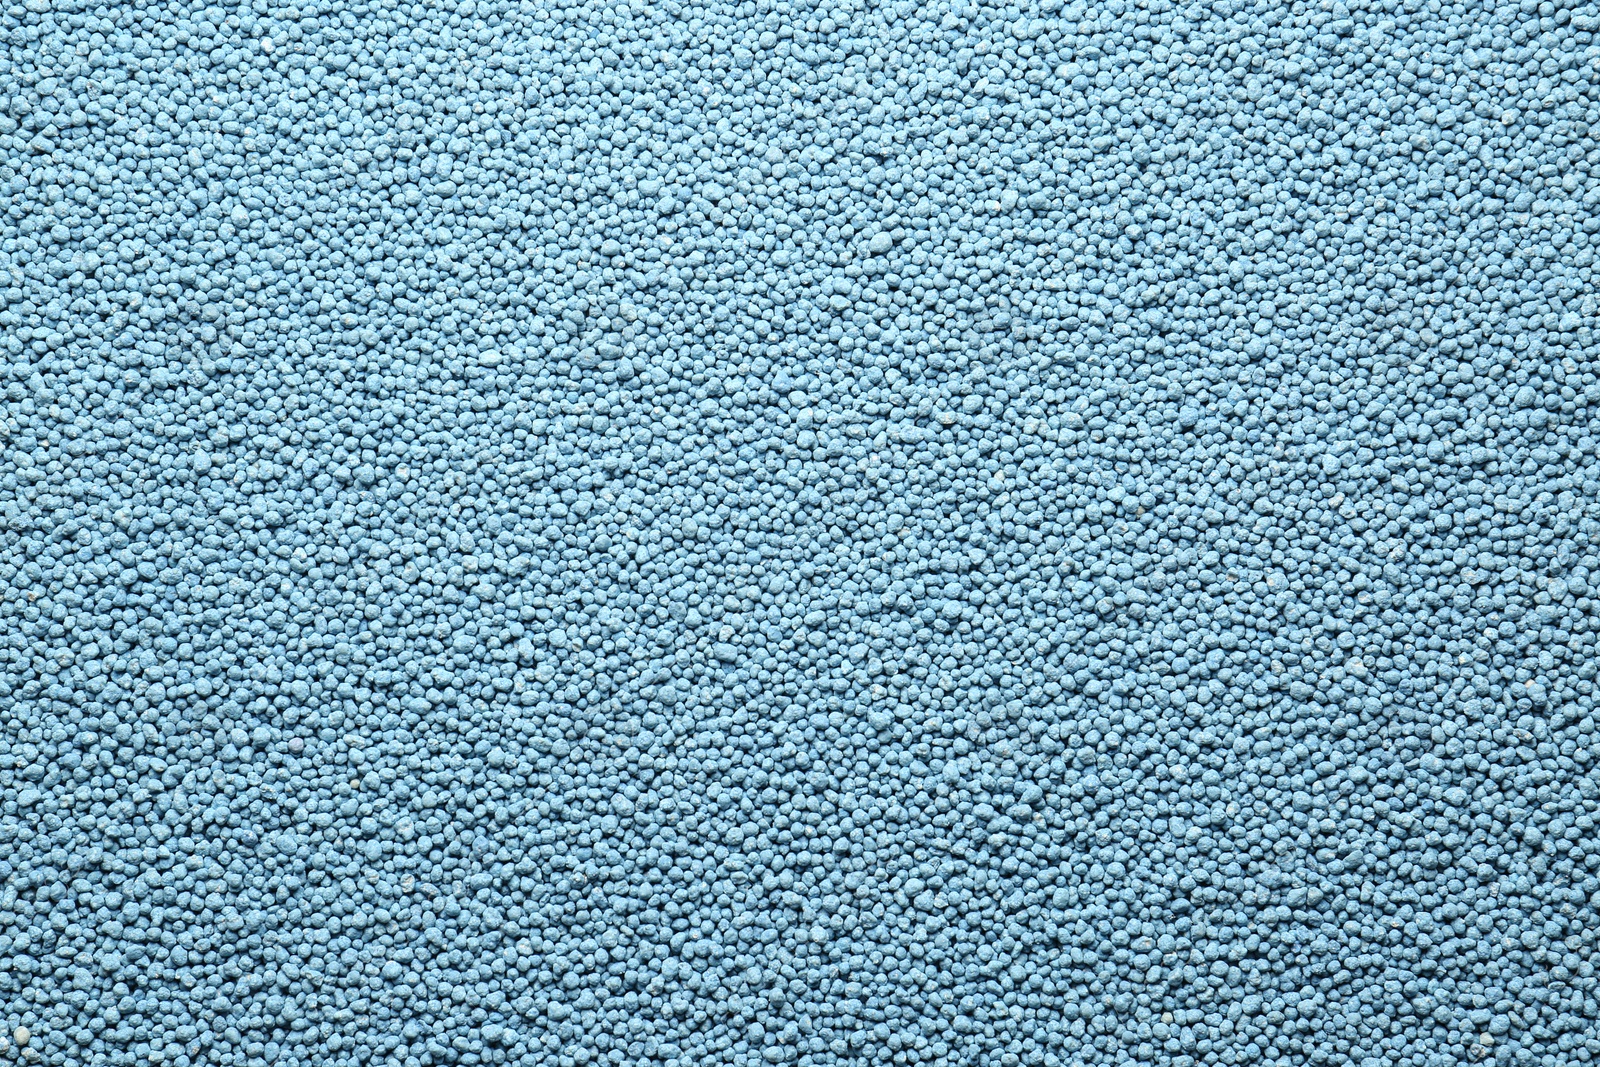 Photo of Blue granular mineral fertilizer as background, top view